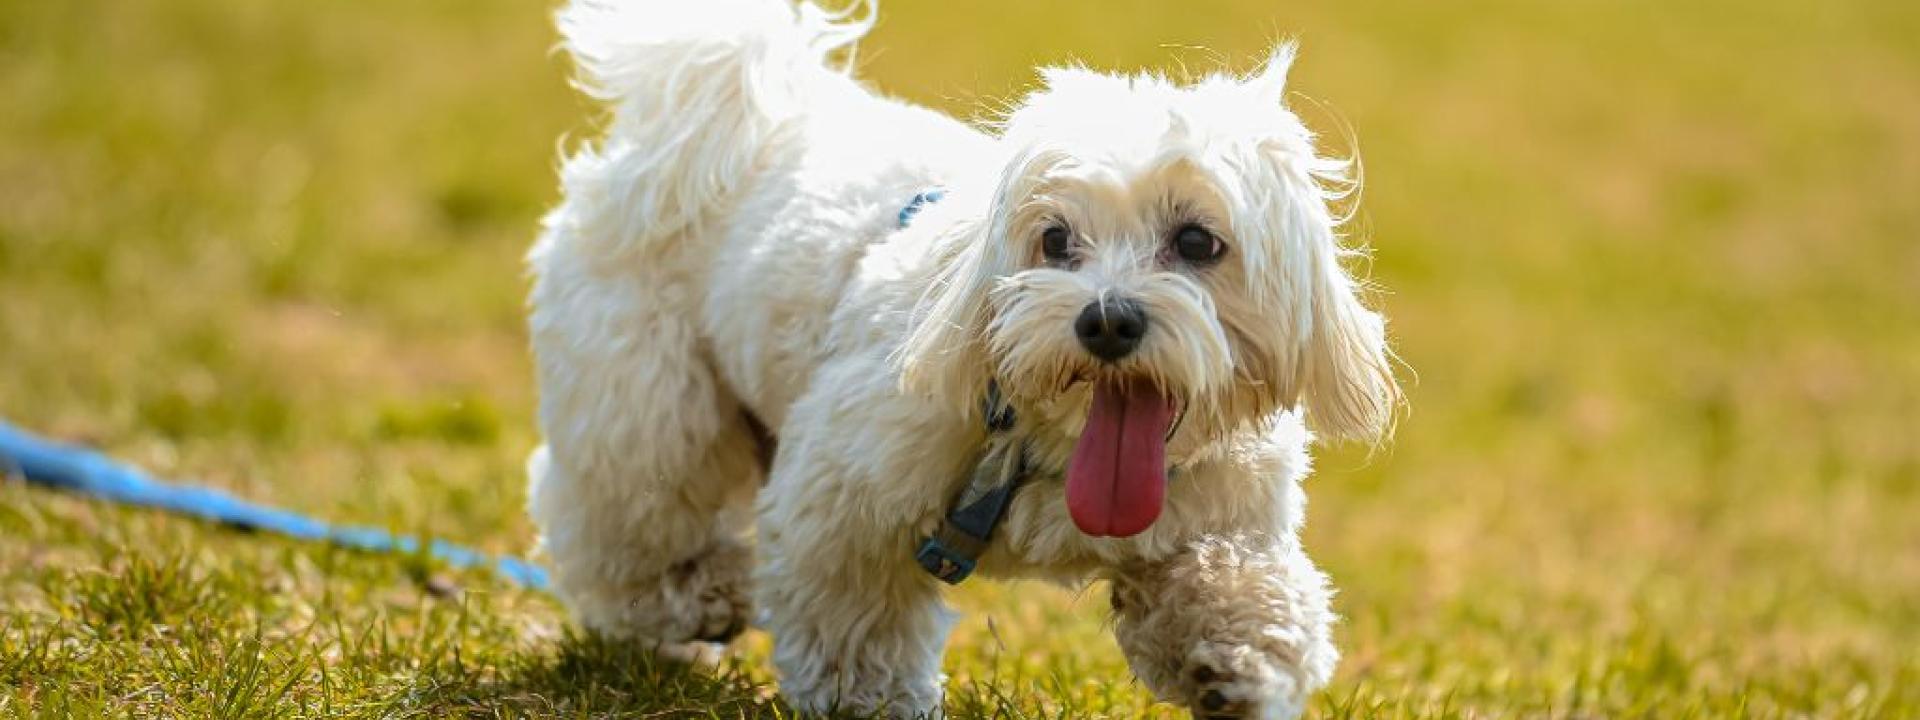 A white Shih Tzu dog walking on the grass on a leash